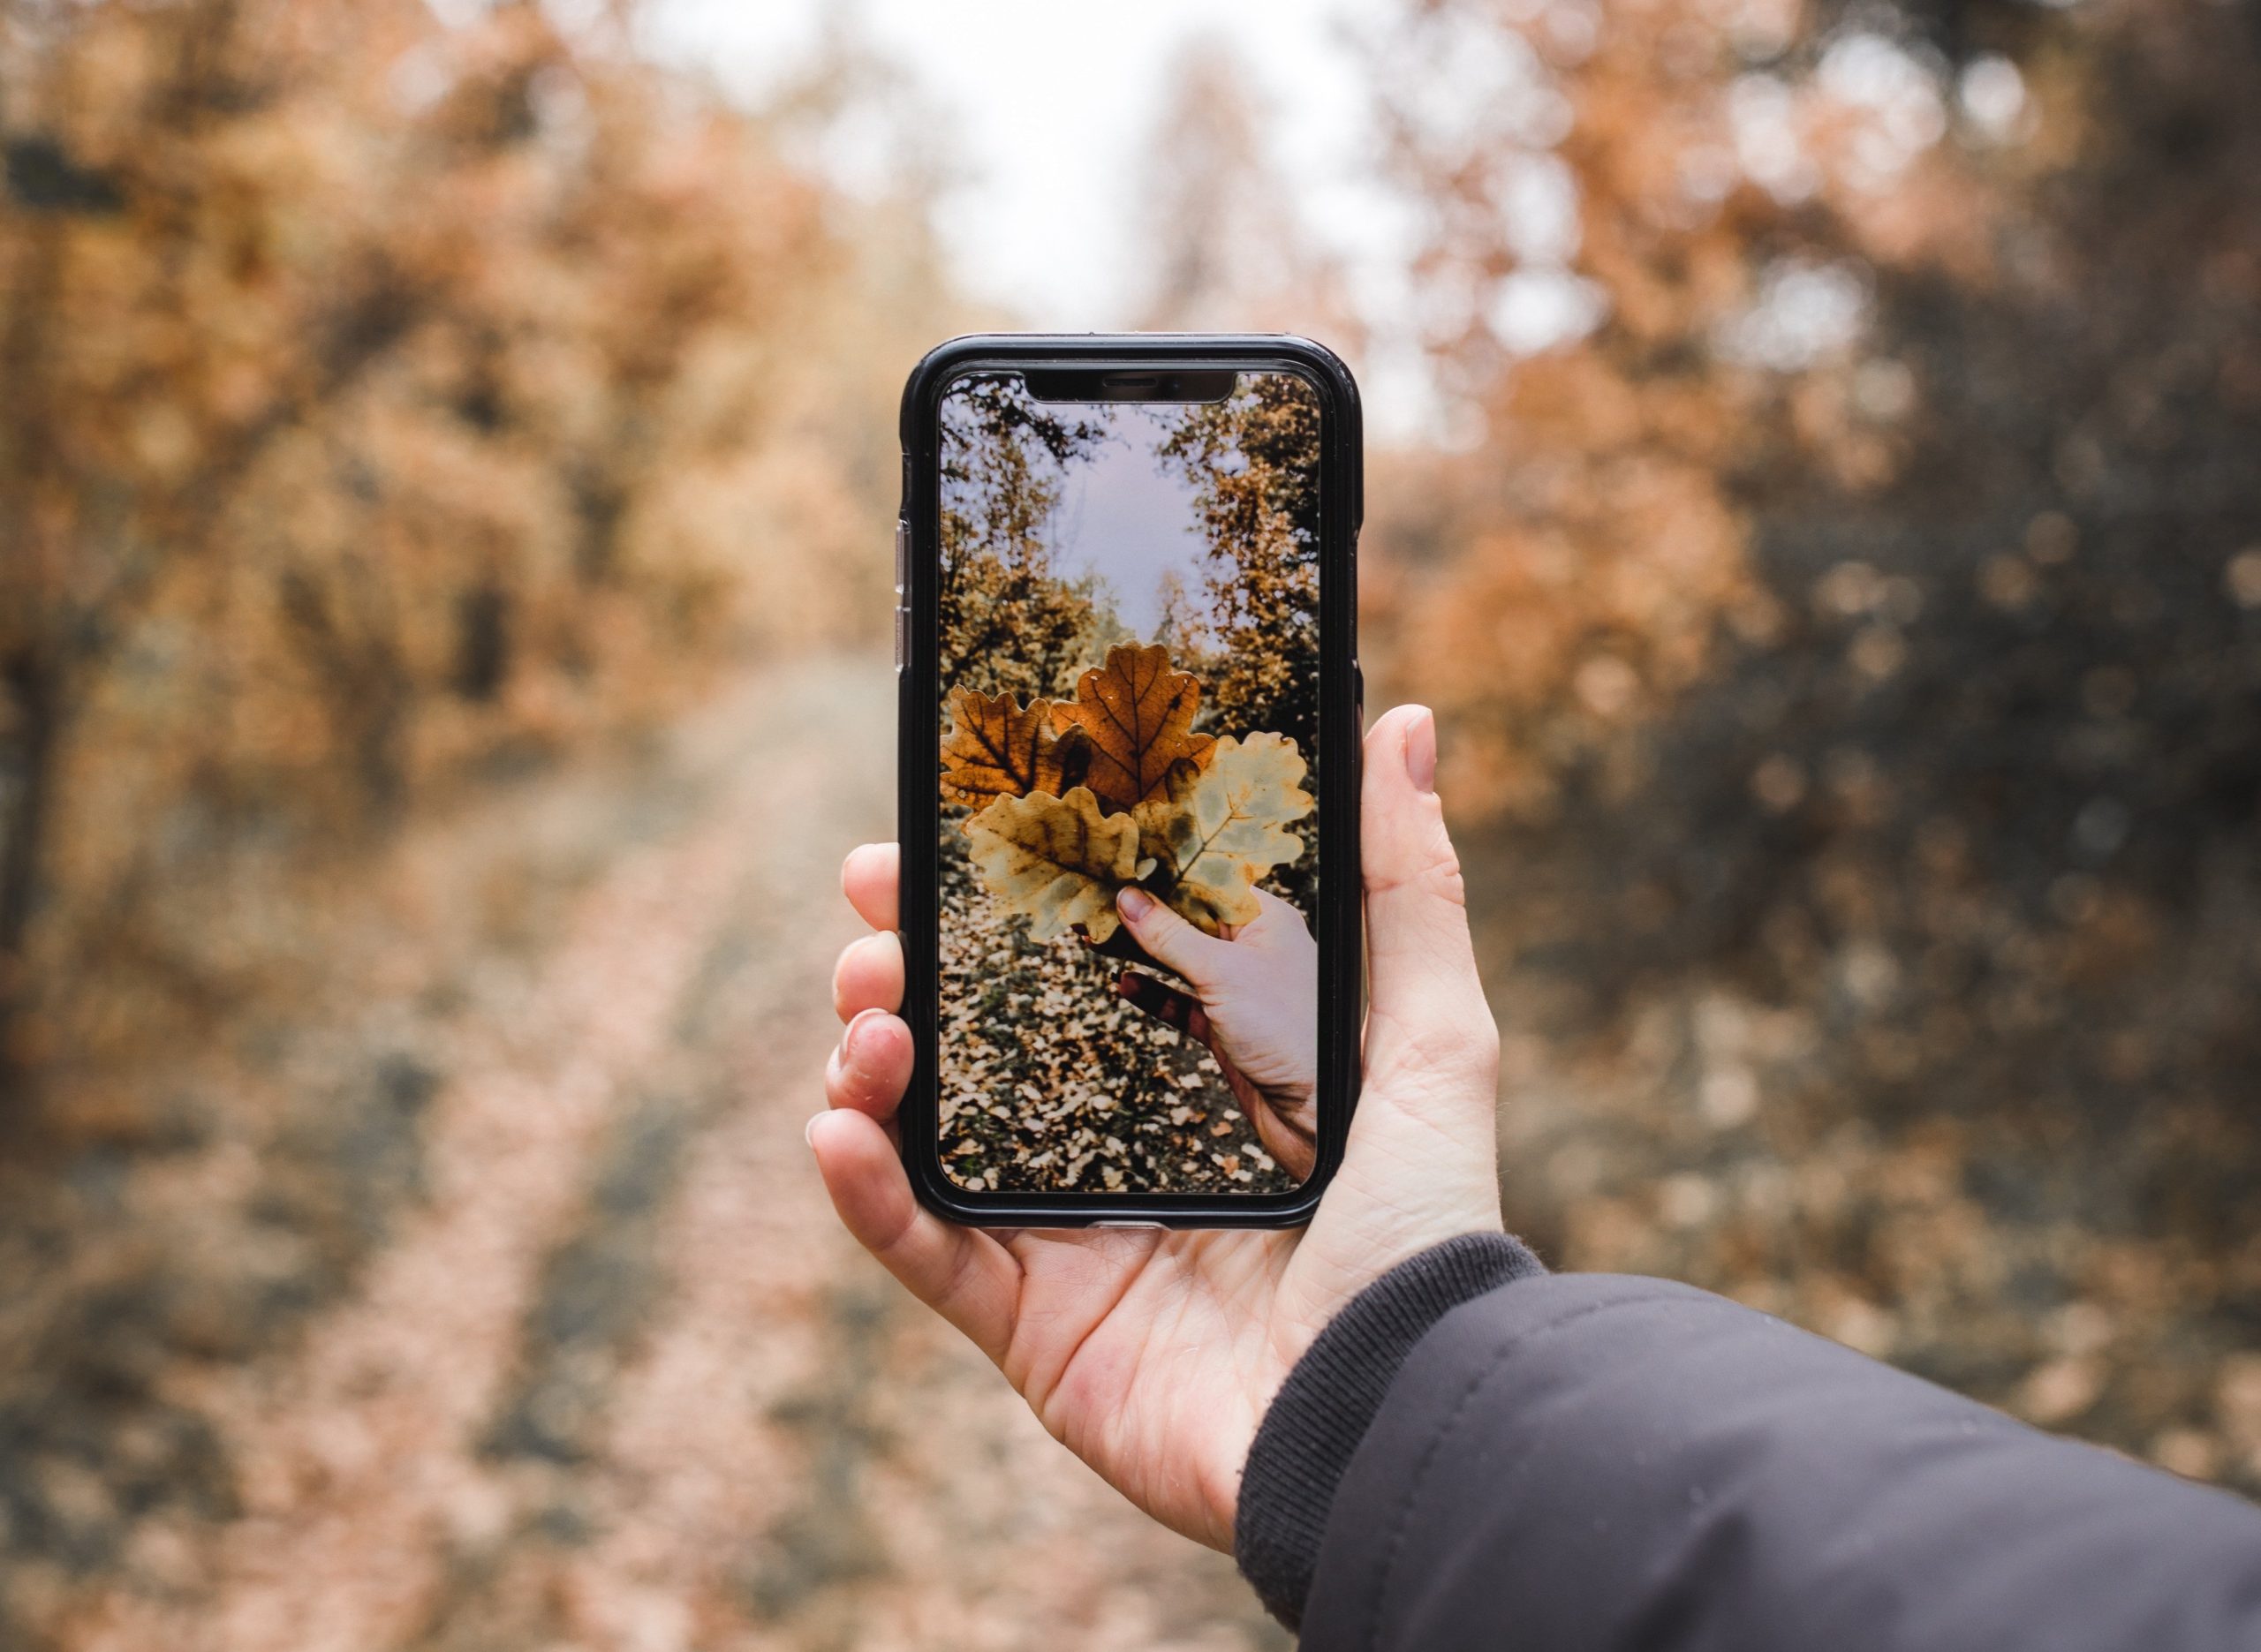 A hand holding a smartphone taking a picture of fallen leaves in autumn colors with a forest in the background.